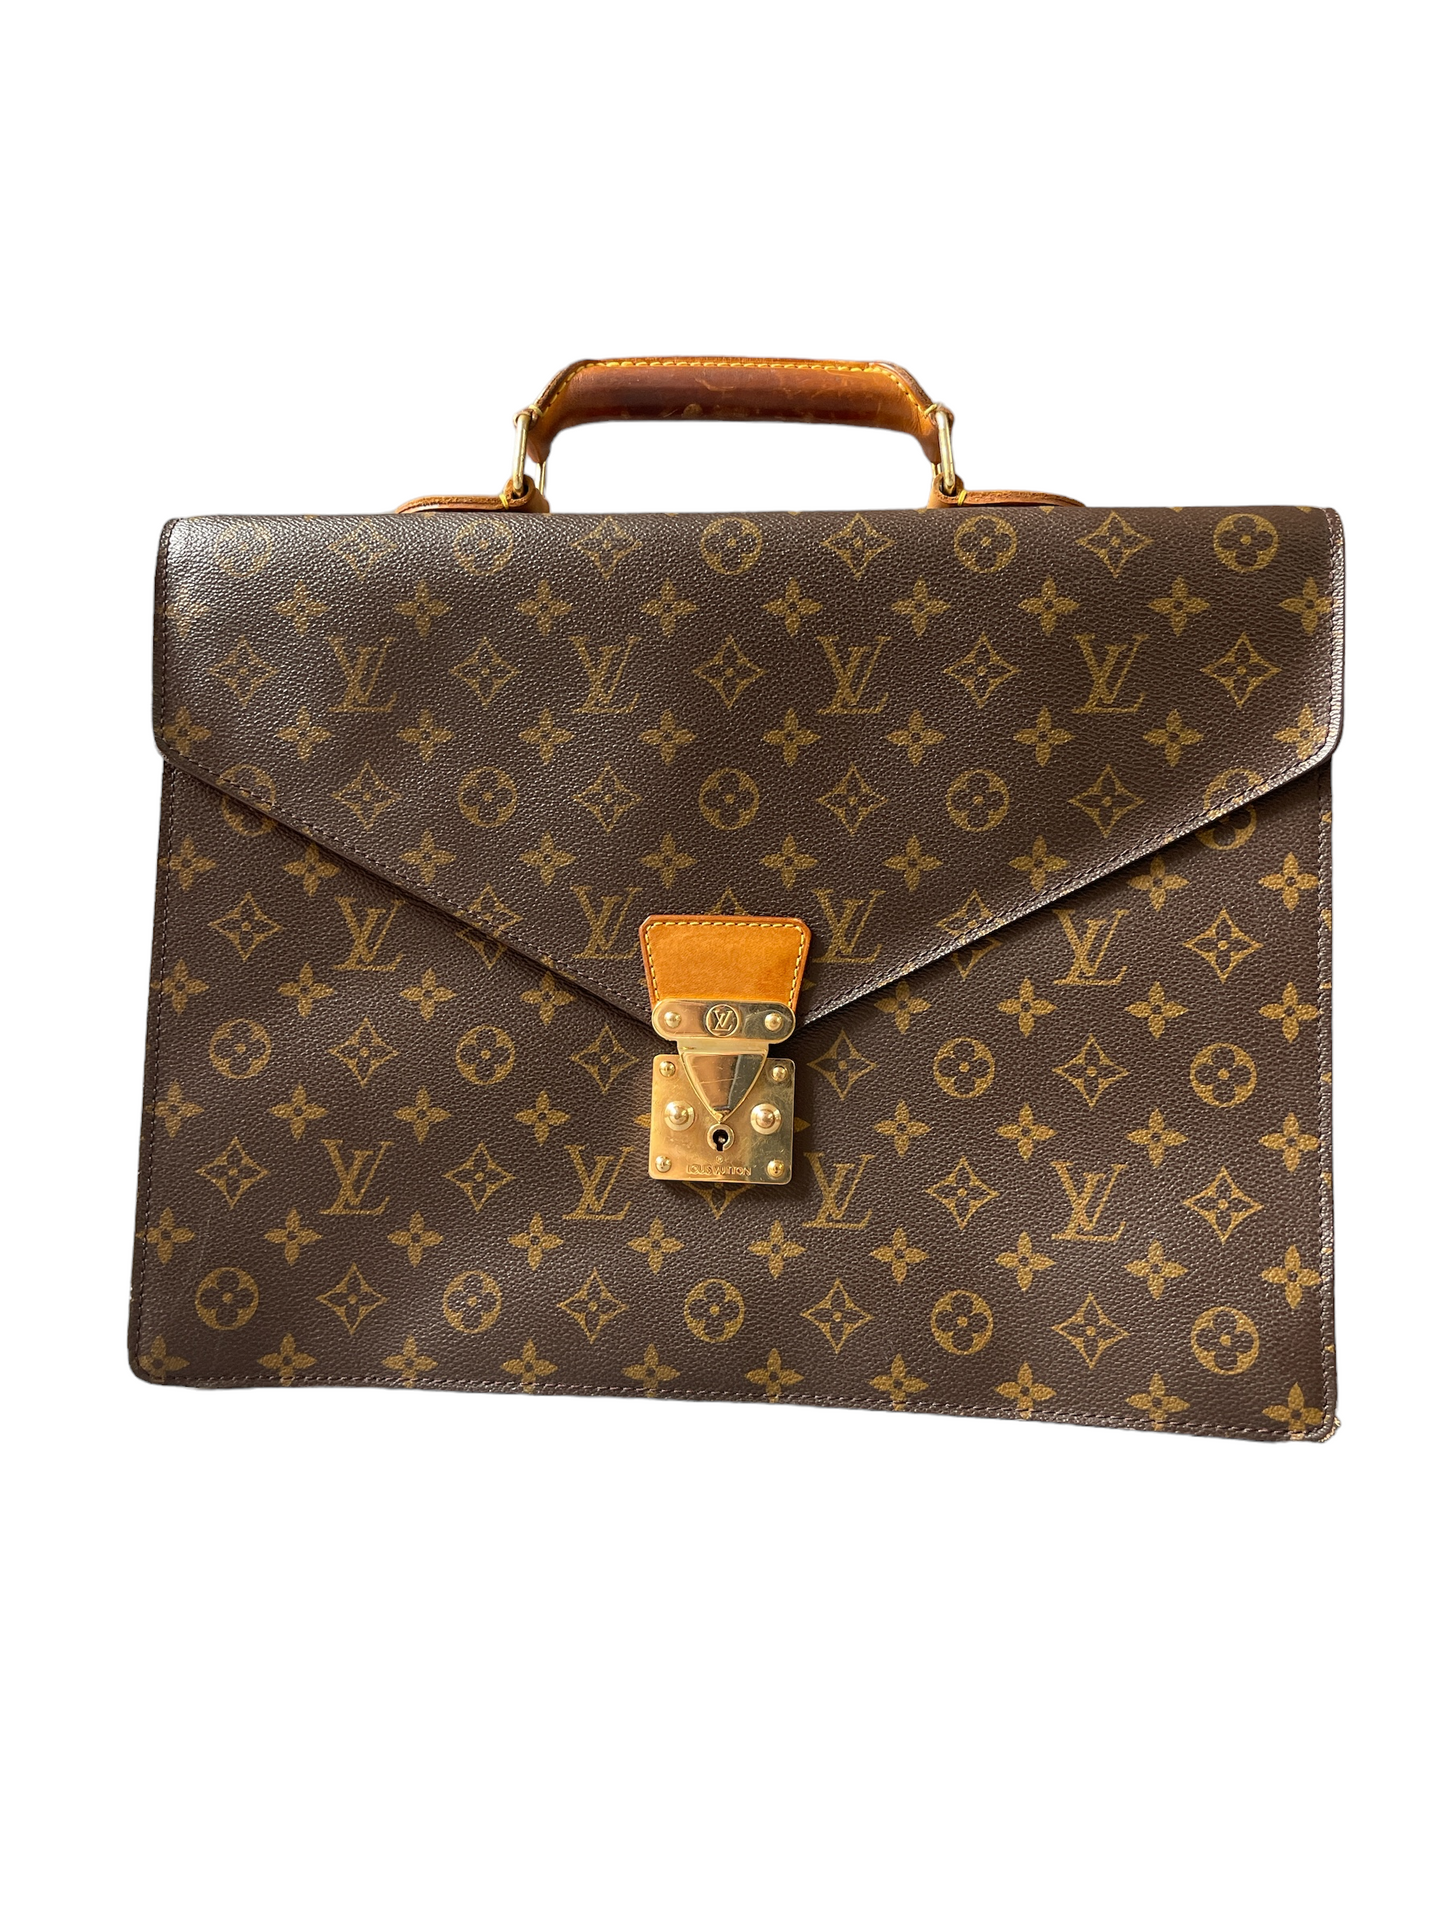 Louis Vuitton Vintage Briefcase with Classic LV Monogram and Gold Buckle